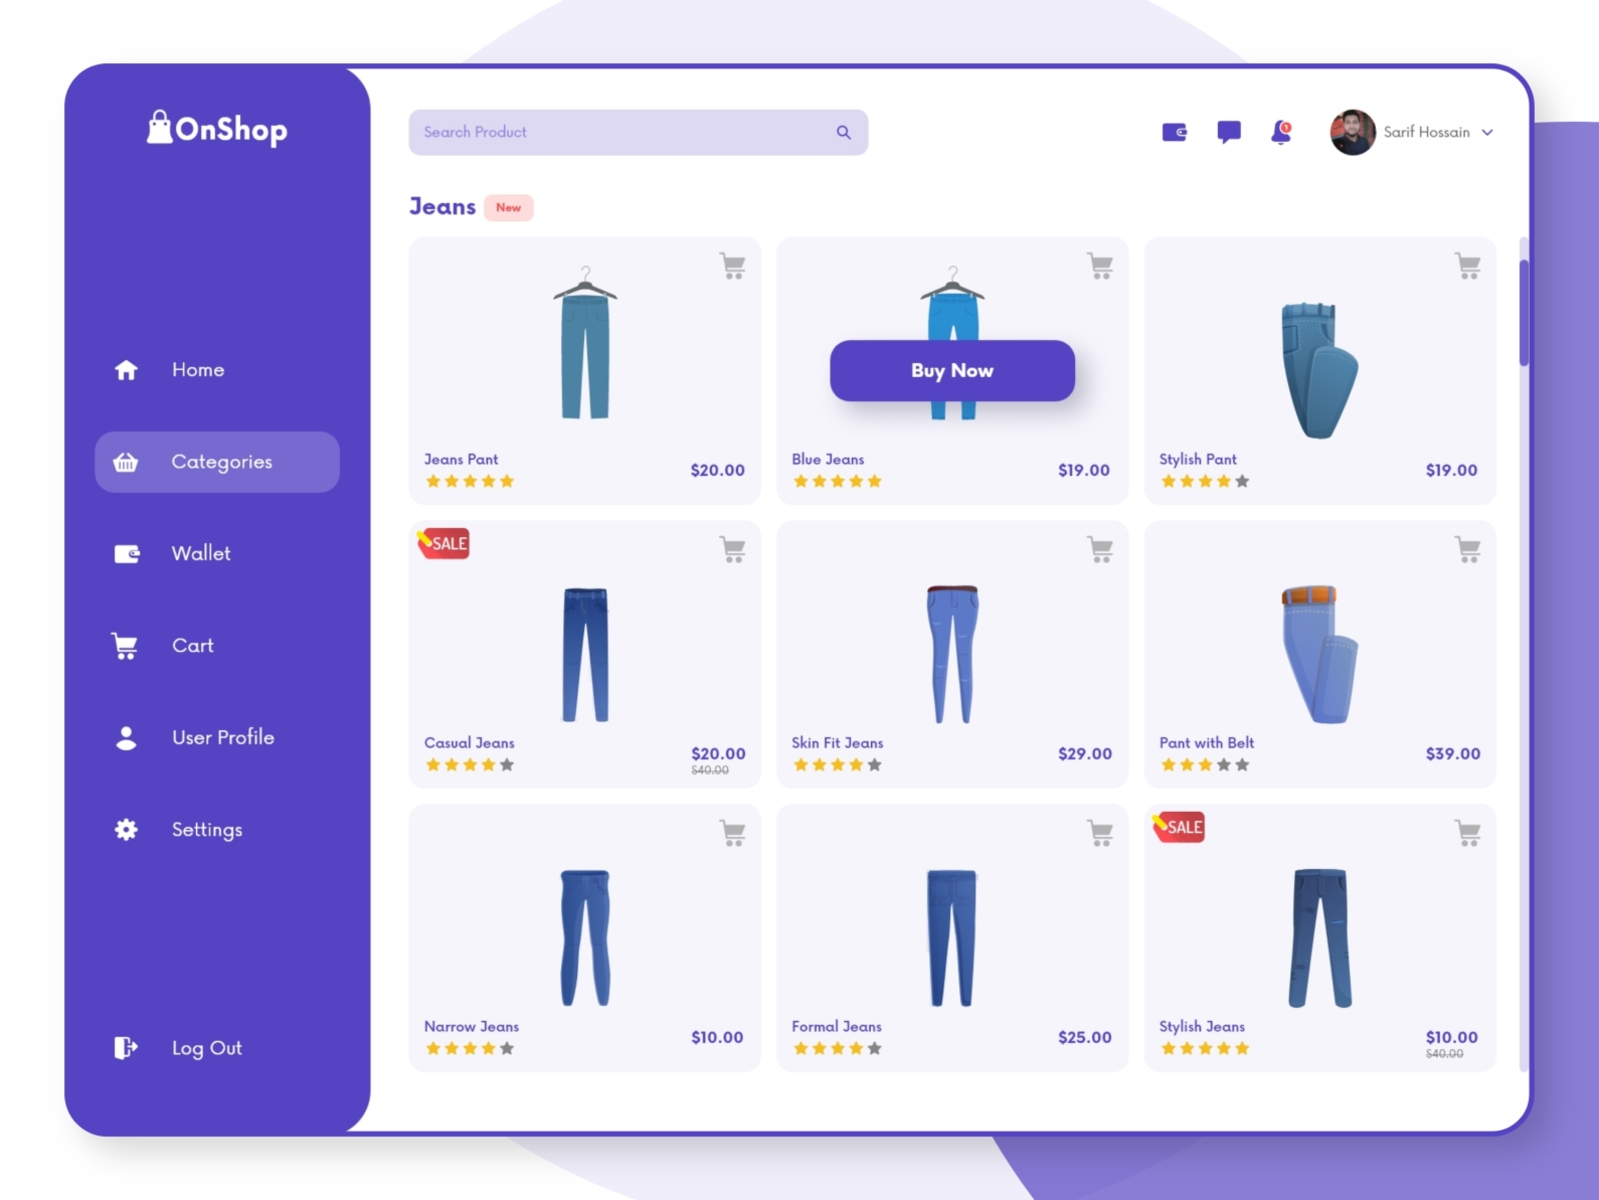 Product Page screen design idea #8: OnShop-Product Page Design